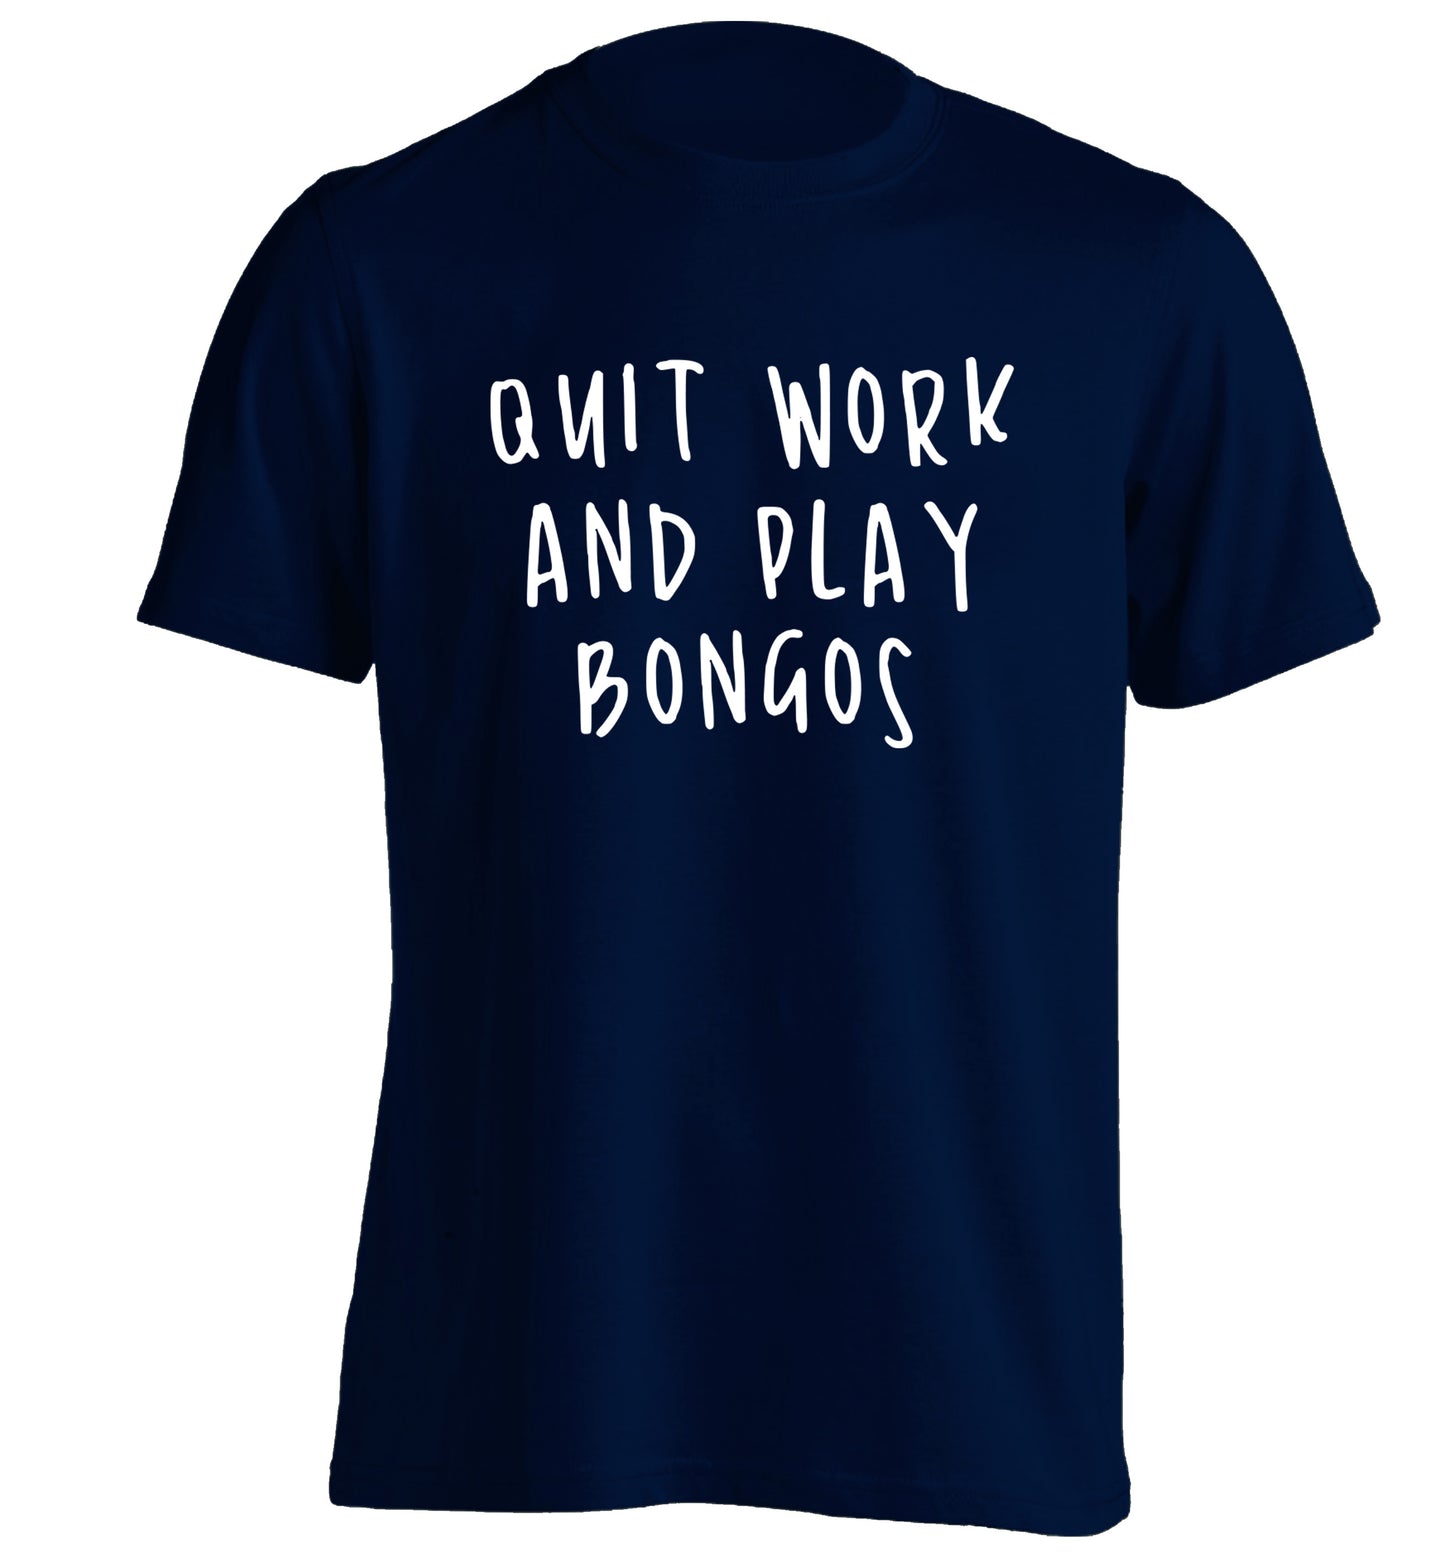 Quit work and play bongos adults unisex navy Tshirt 2XL